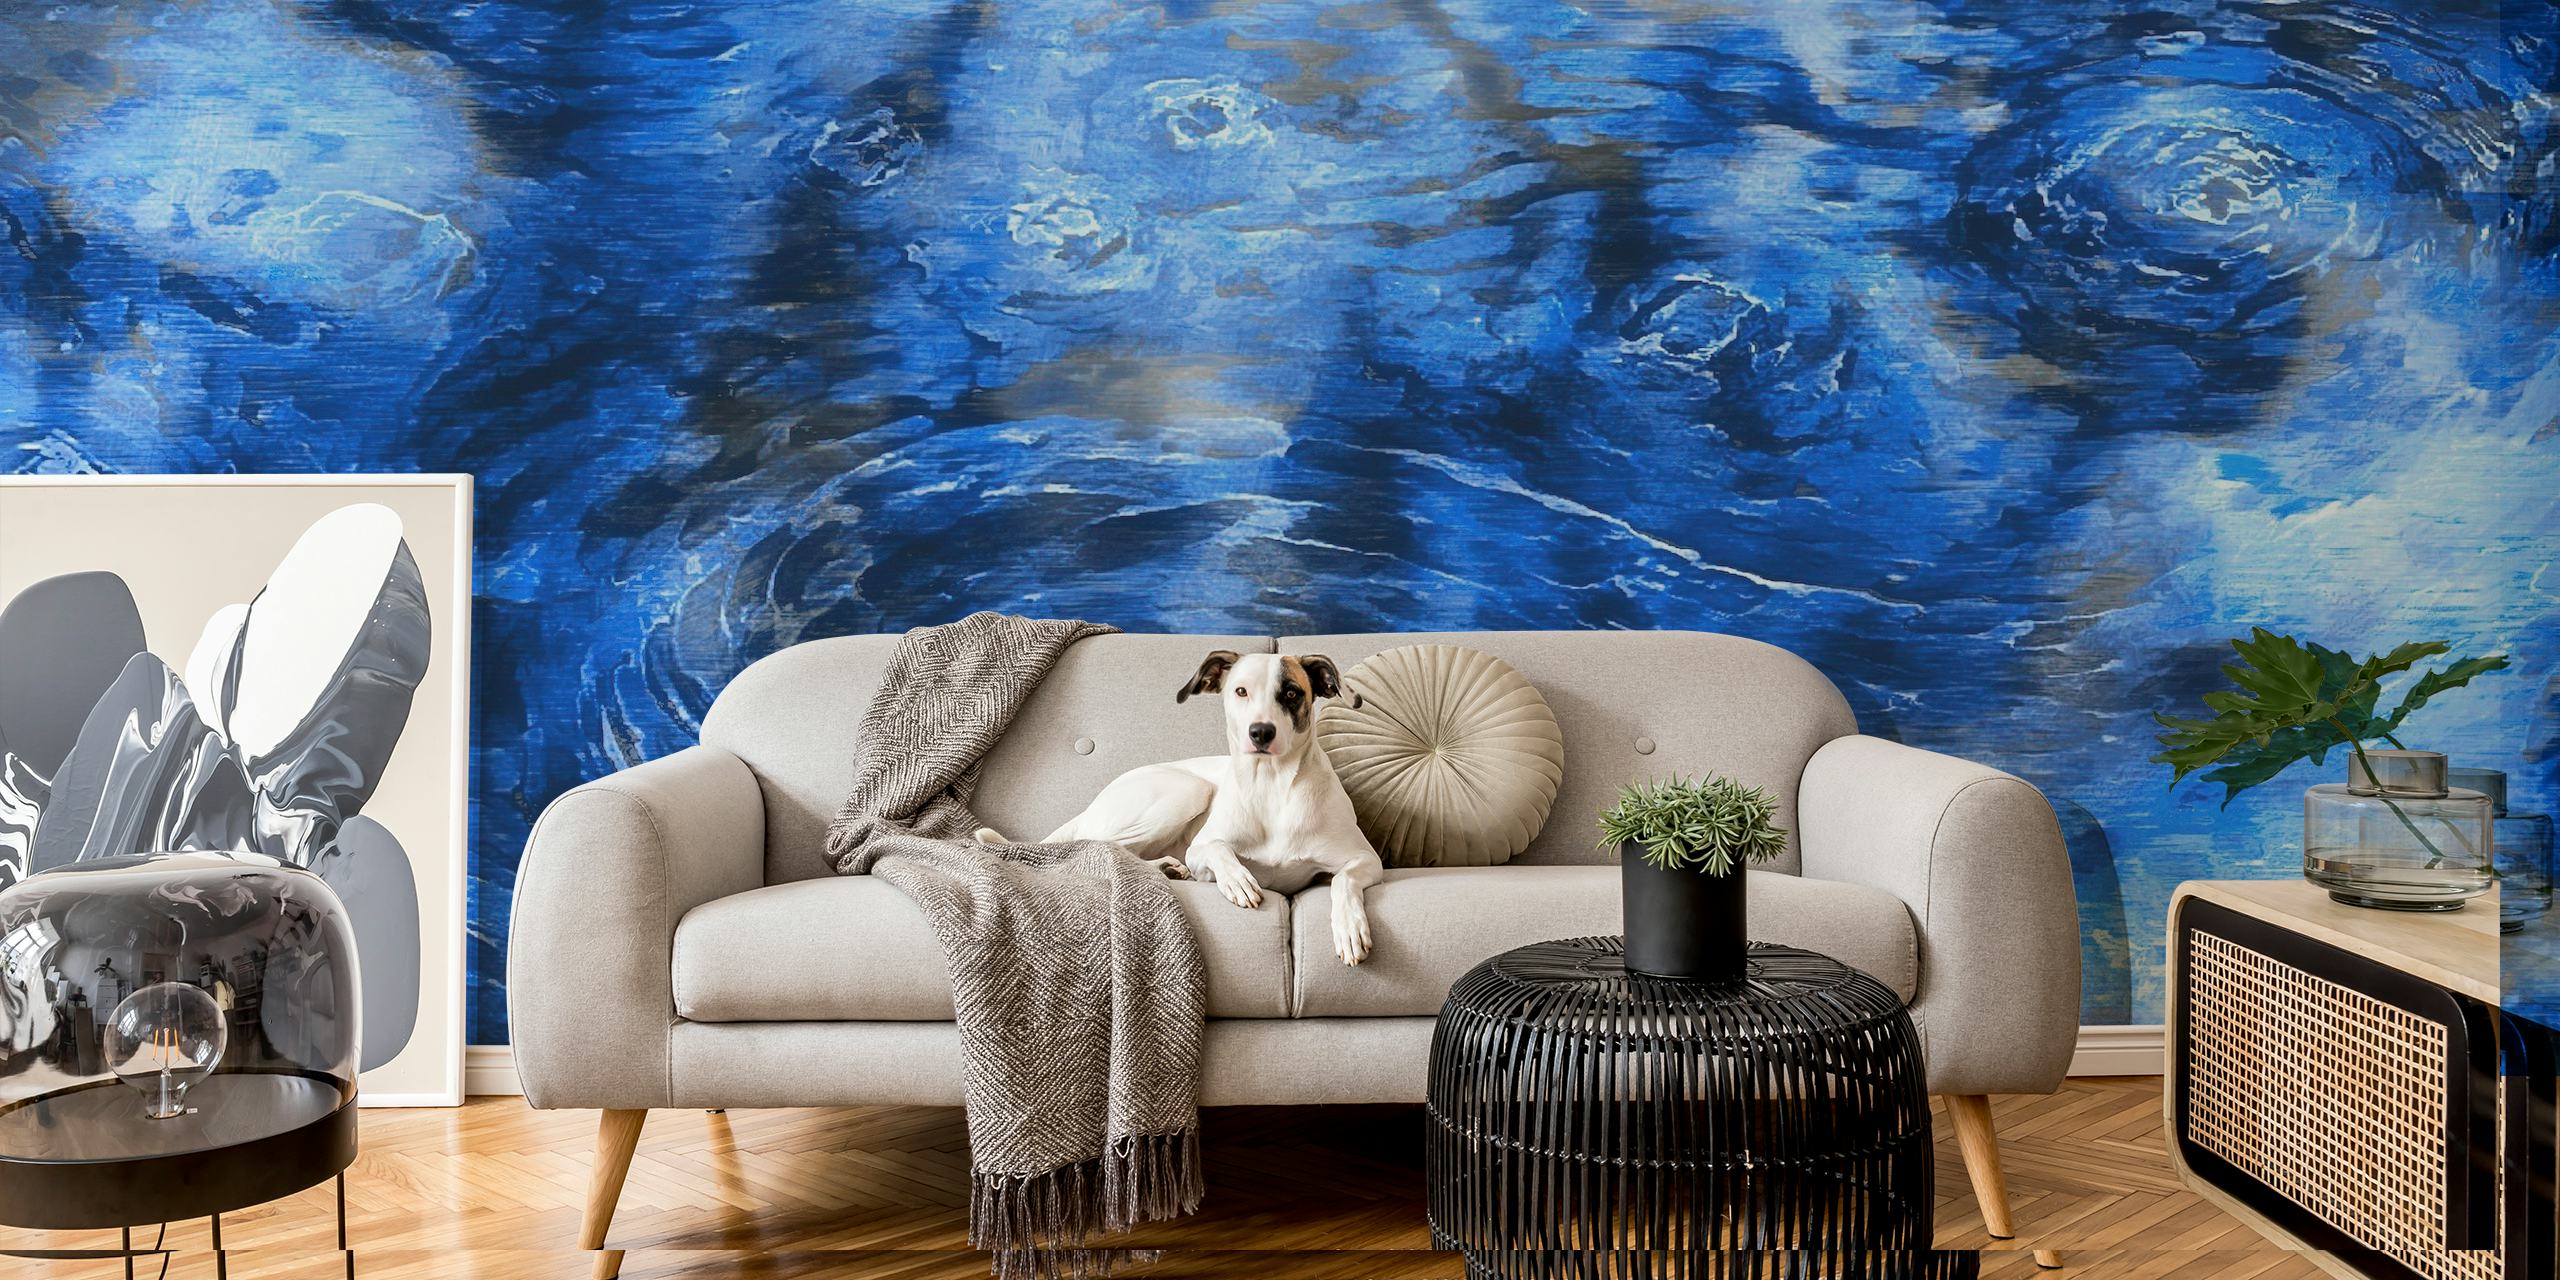 Impressionist-style Van Gogh Clouds wall mural with swirling blue and white patterns